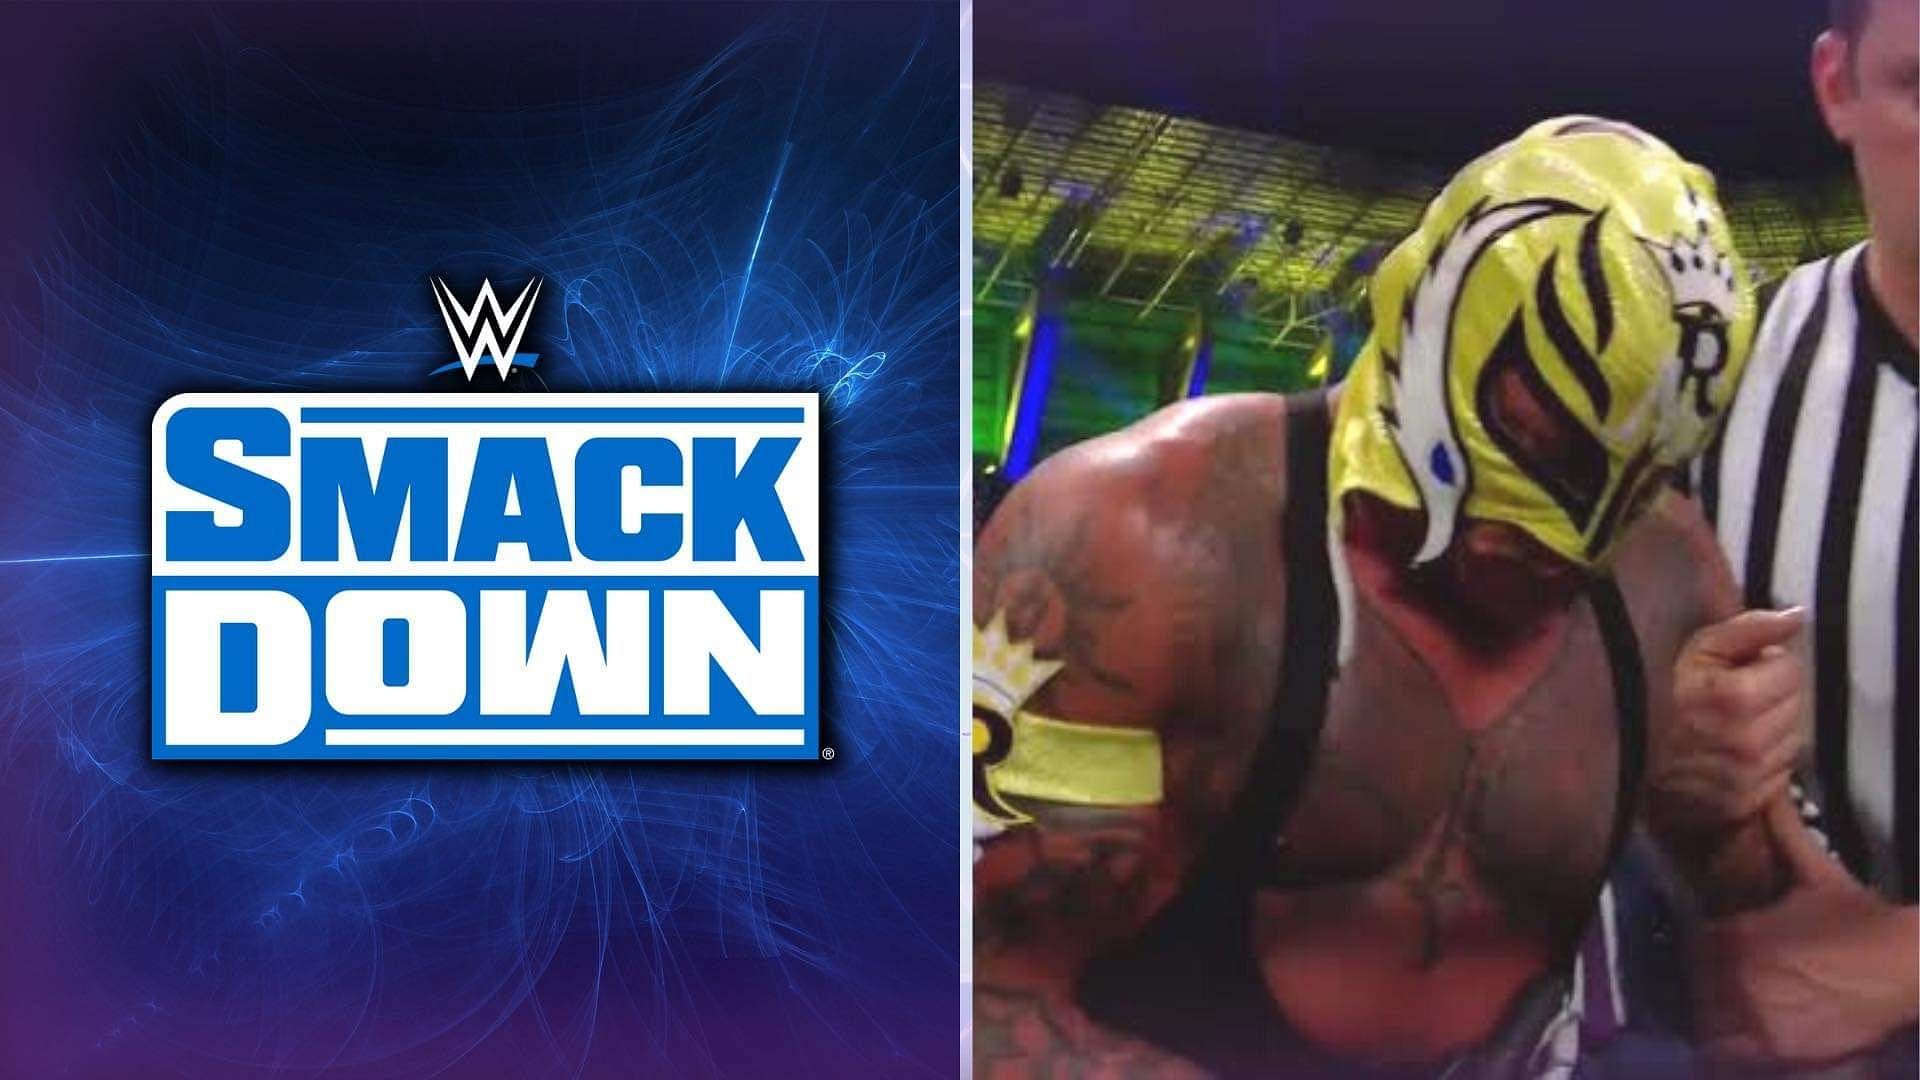 Rey Mysterio was apparently injured on SmackDown